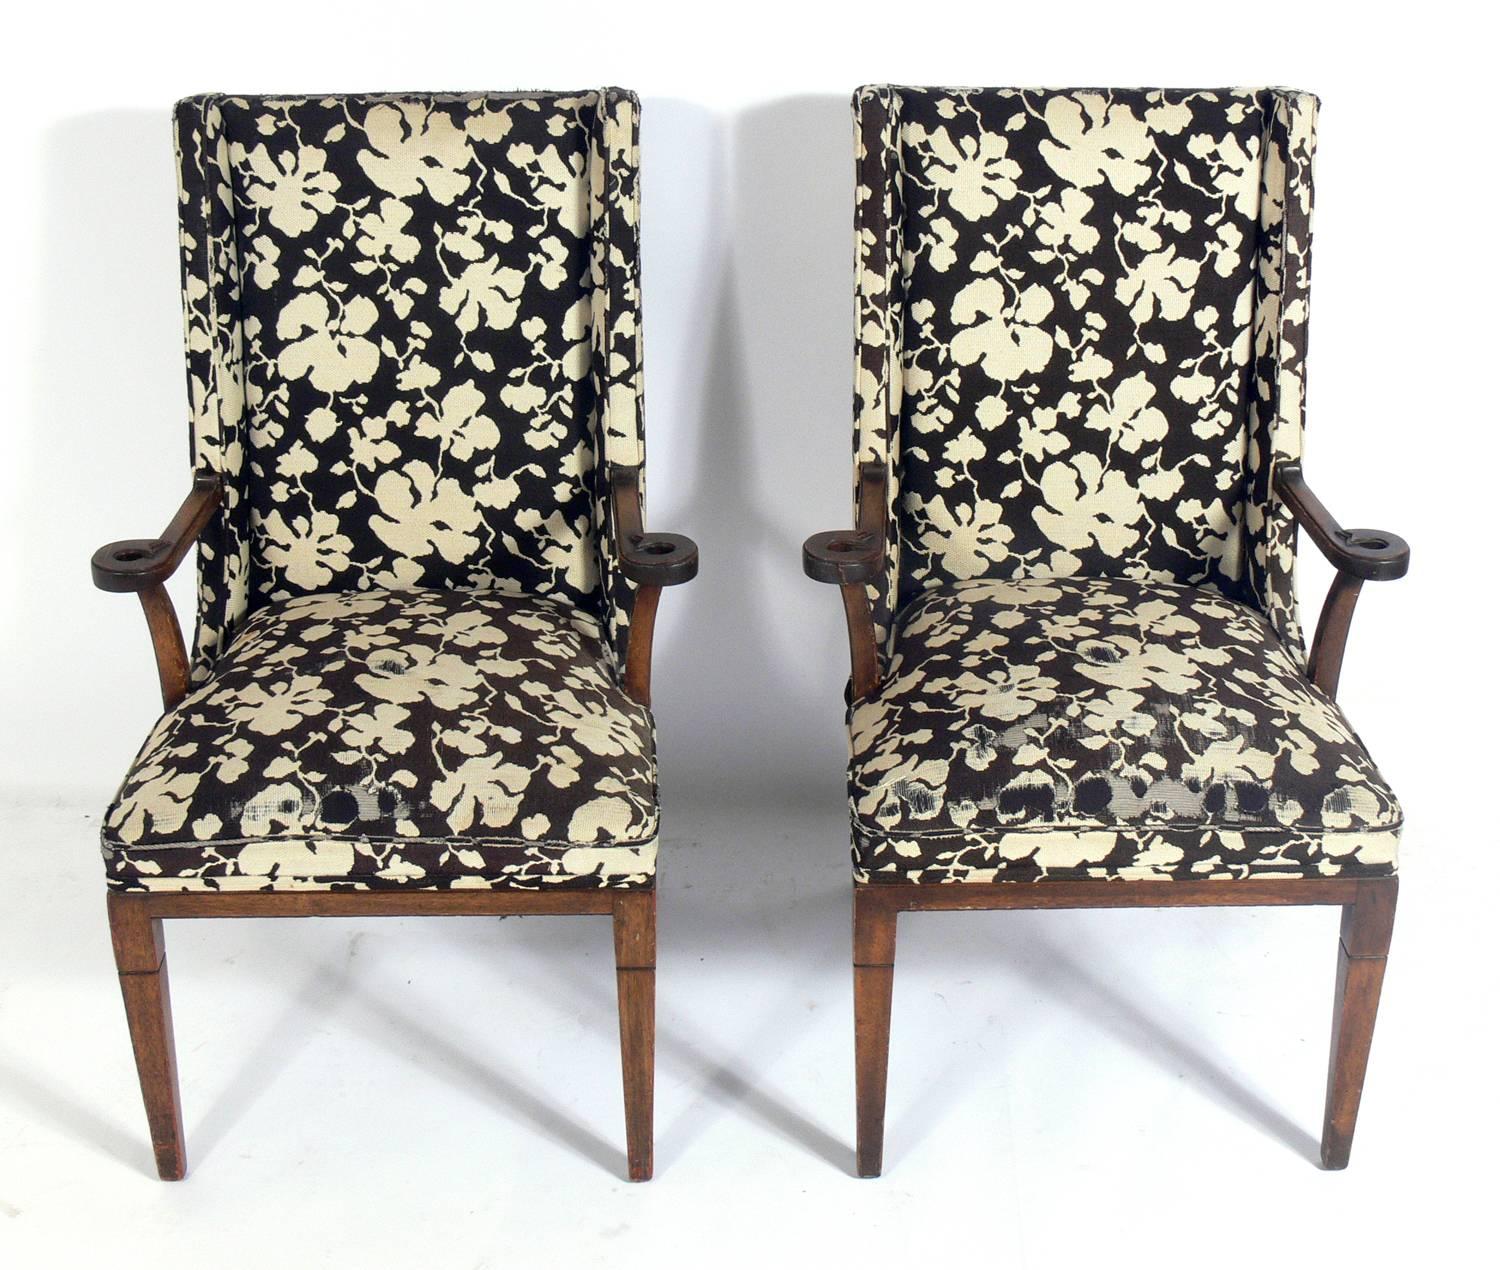 Pair of Elegant armchairs, designed by Tommi Parzinger for Charak, American, circa 1950s. These chairs are currently being refinished and reupholstered. The price noted below includes refinishing in your choice of color and reupholstery in your